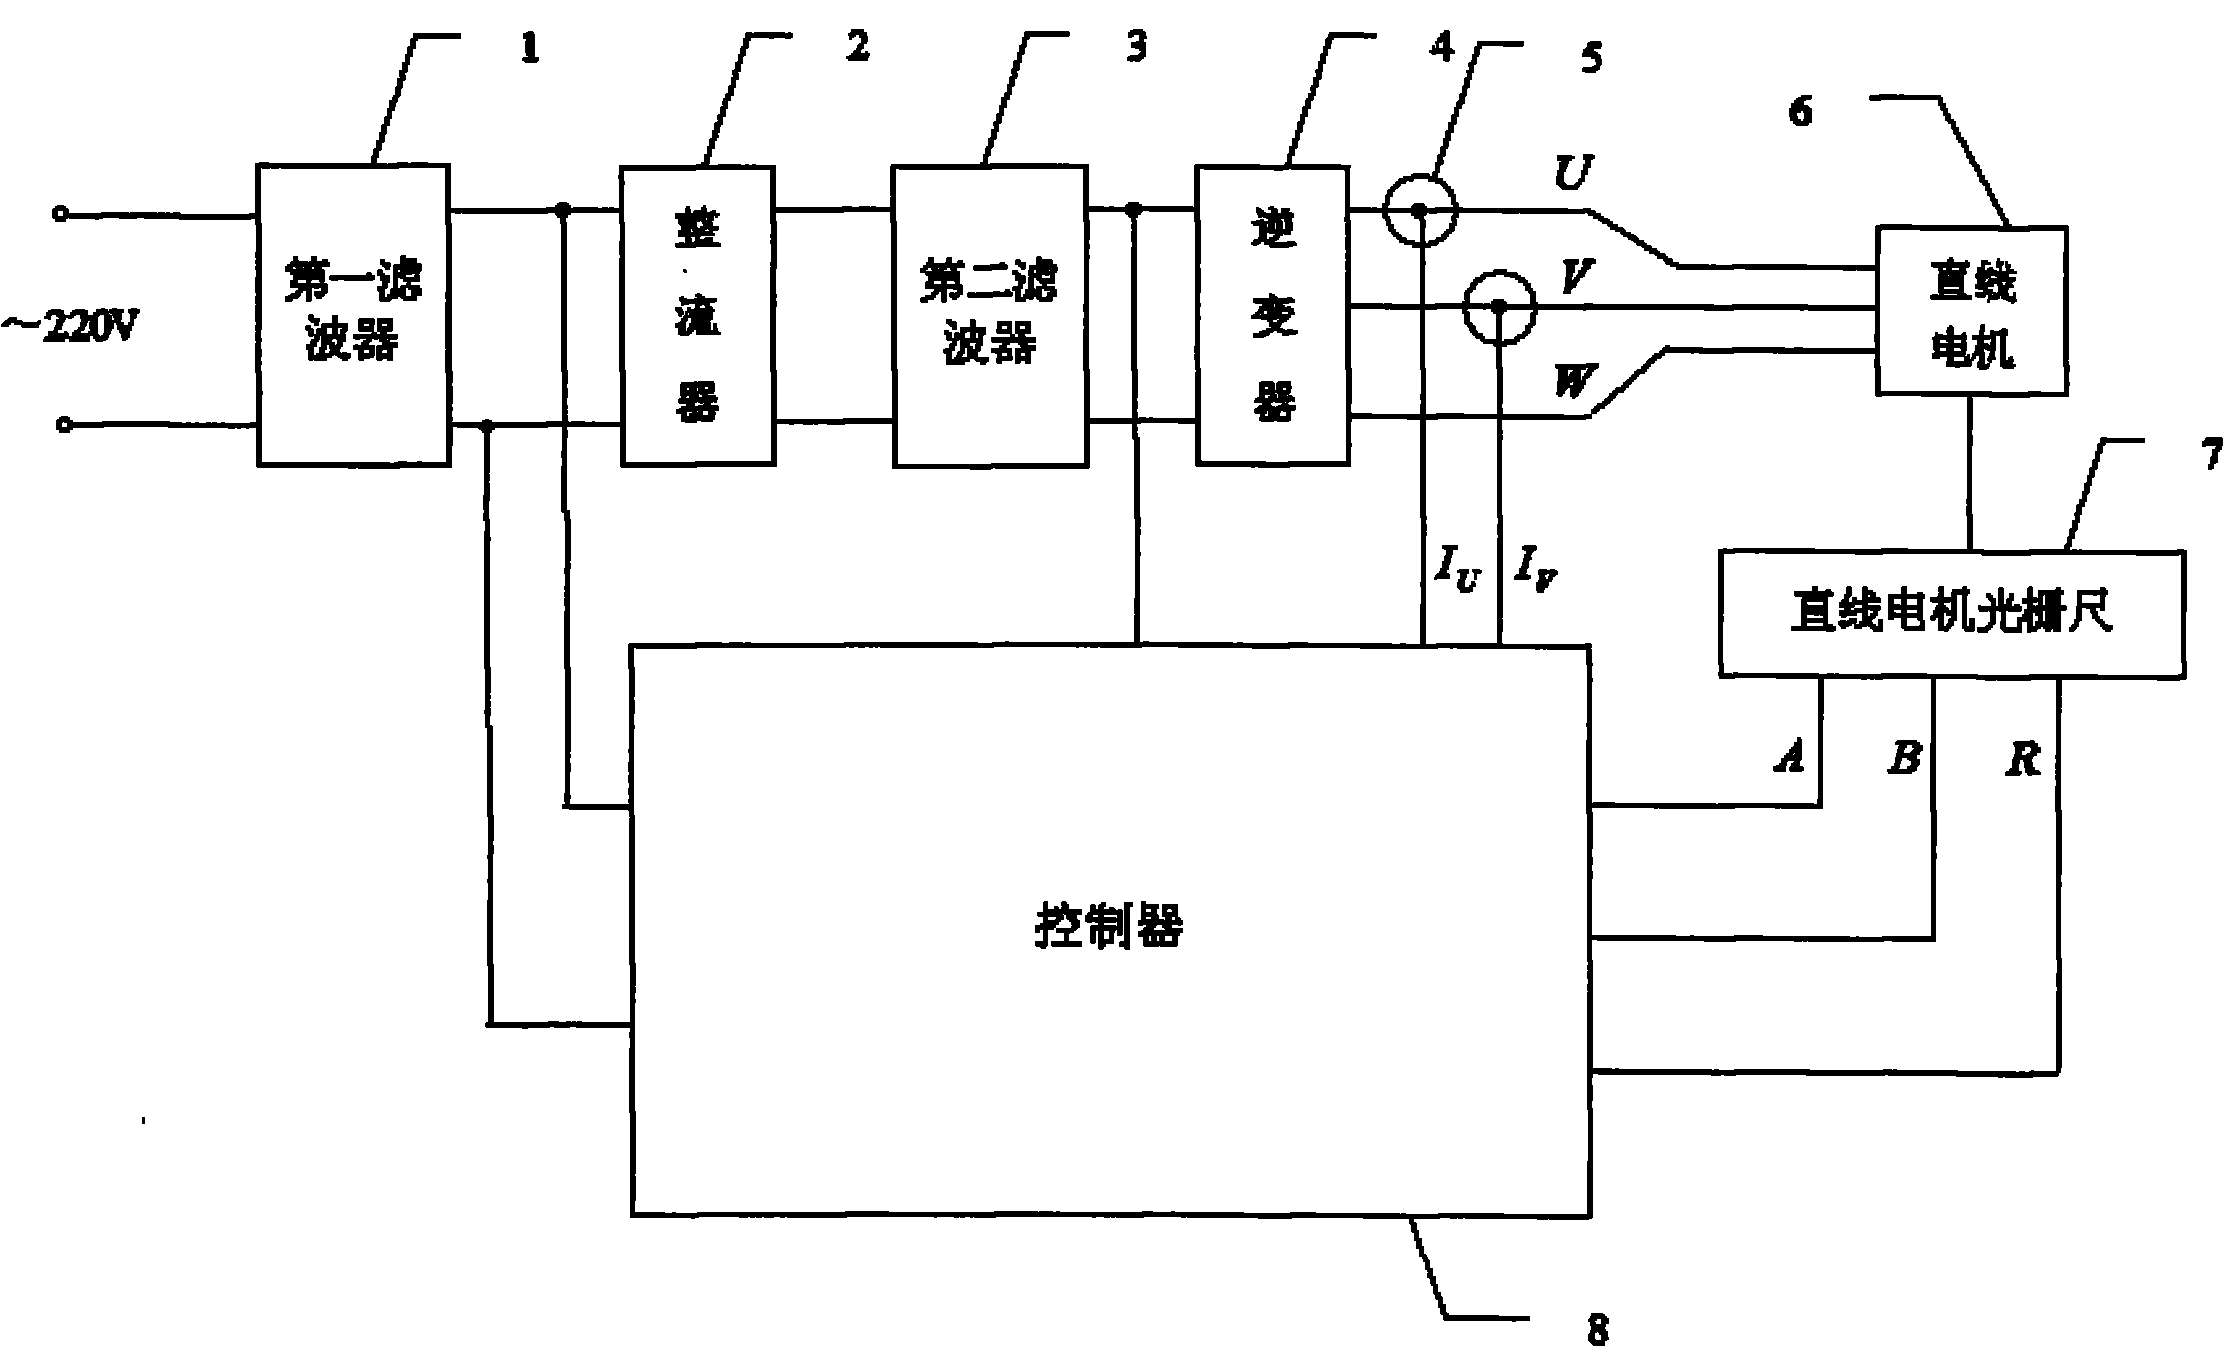 Permanent-magnetic synchronous linear motor driver